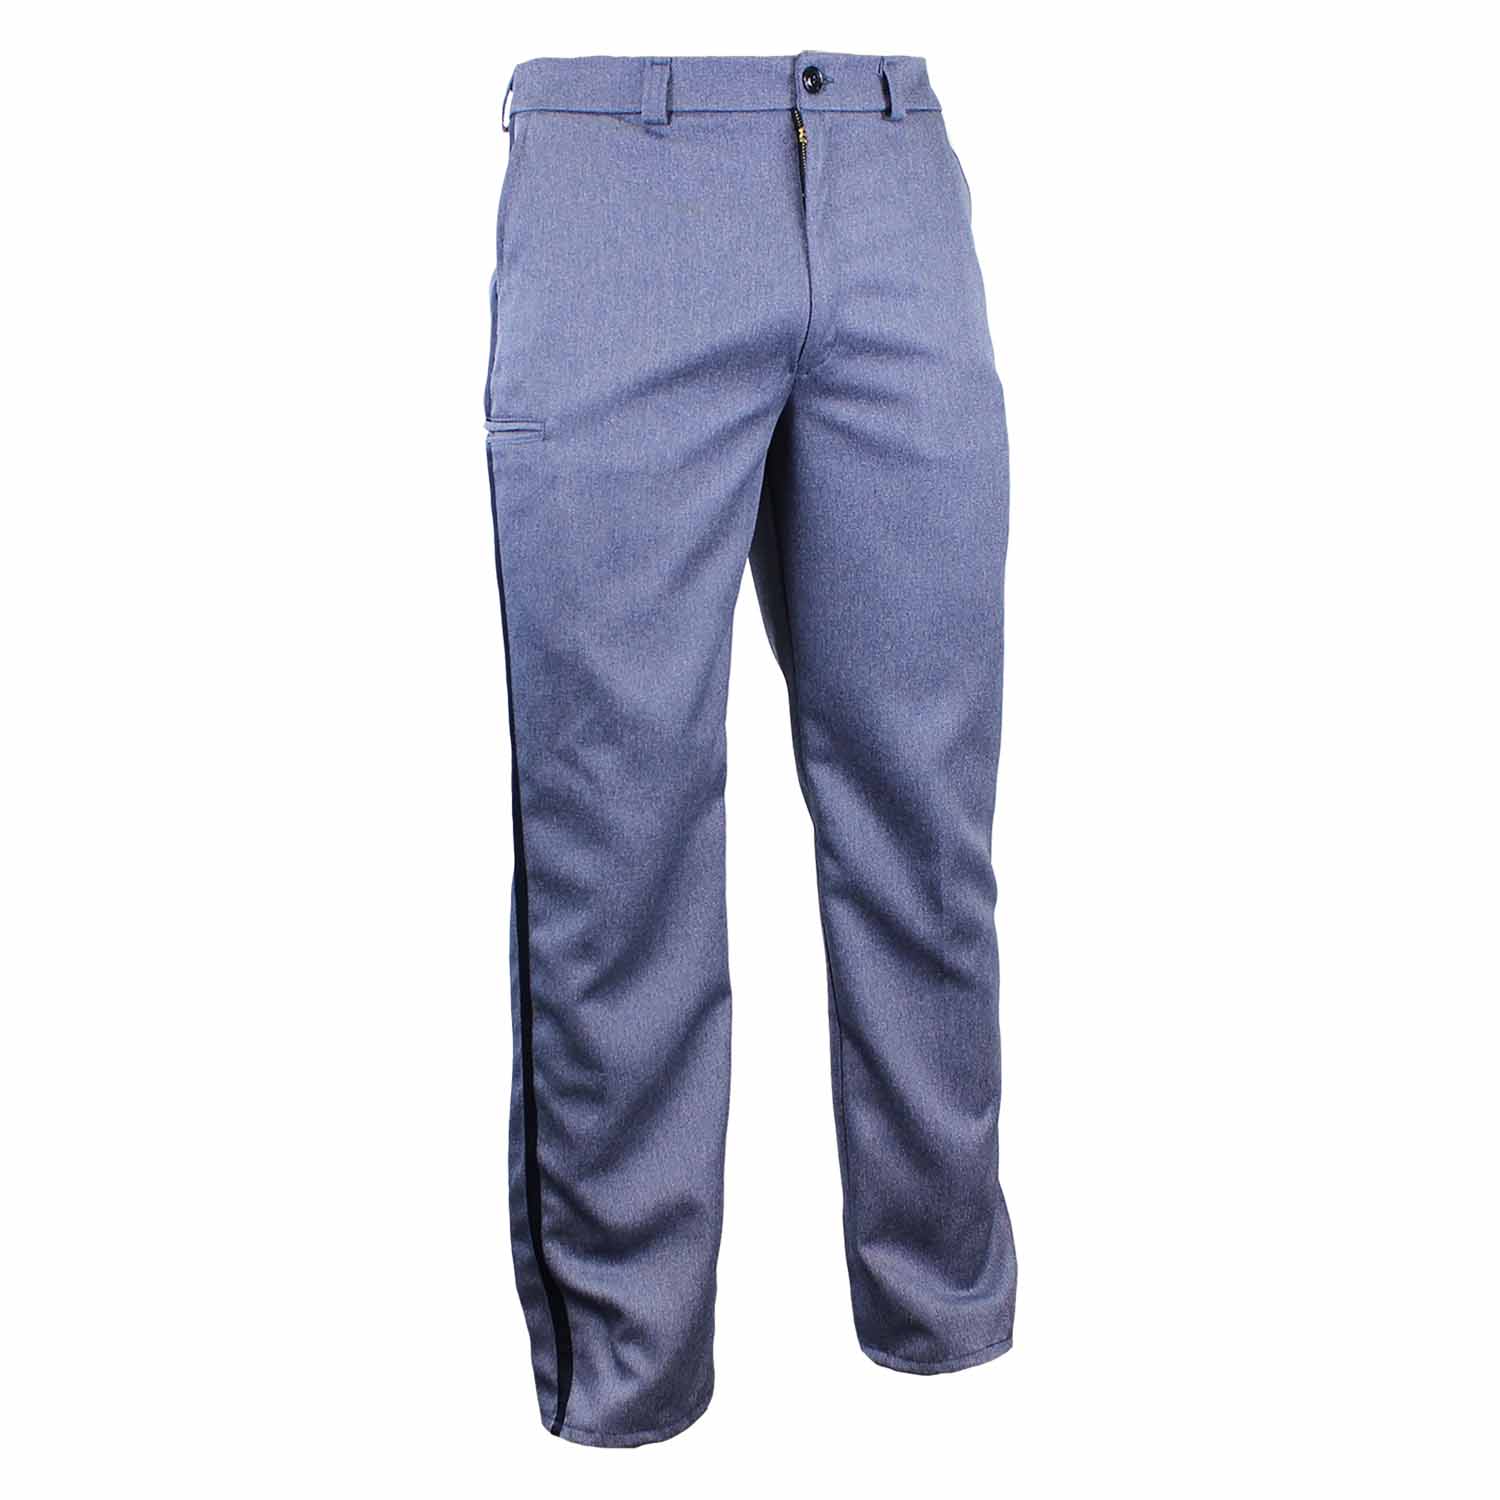 Women's Letter Carrier Winter Weight Trousers